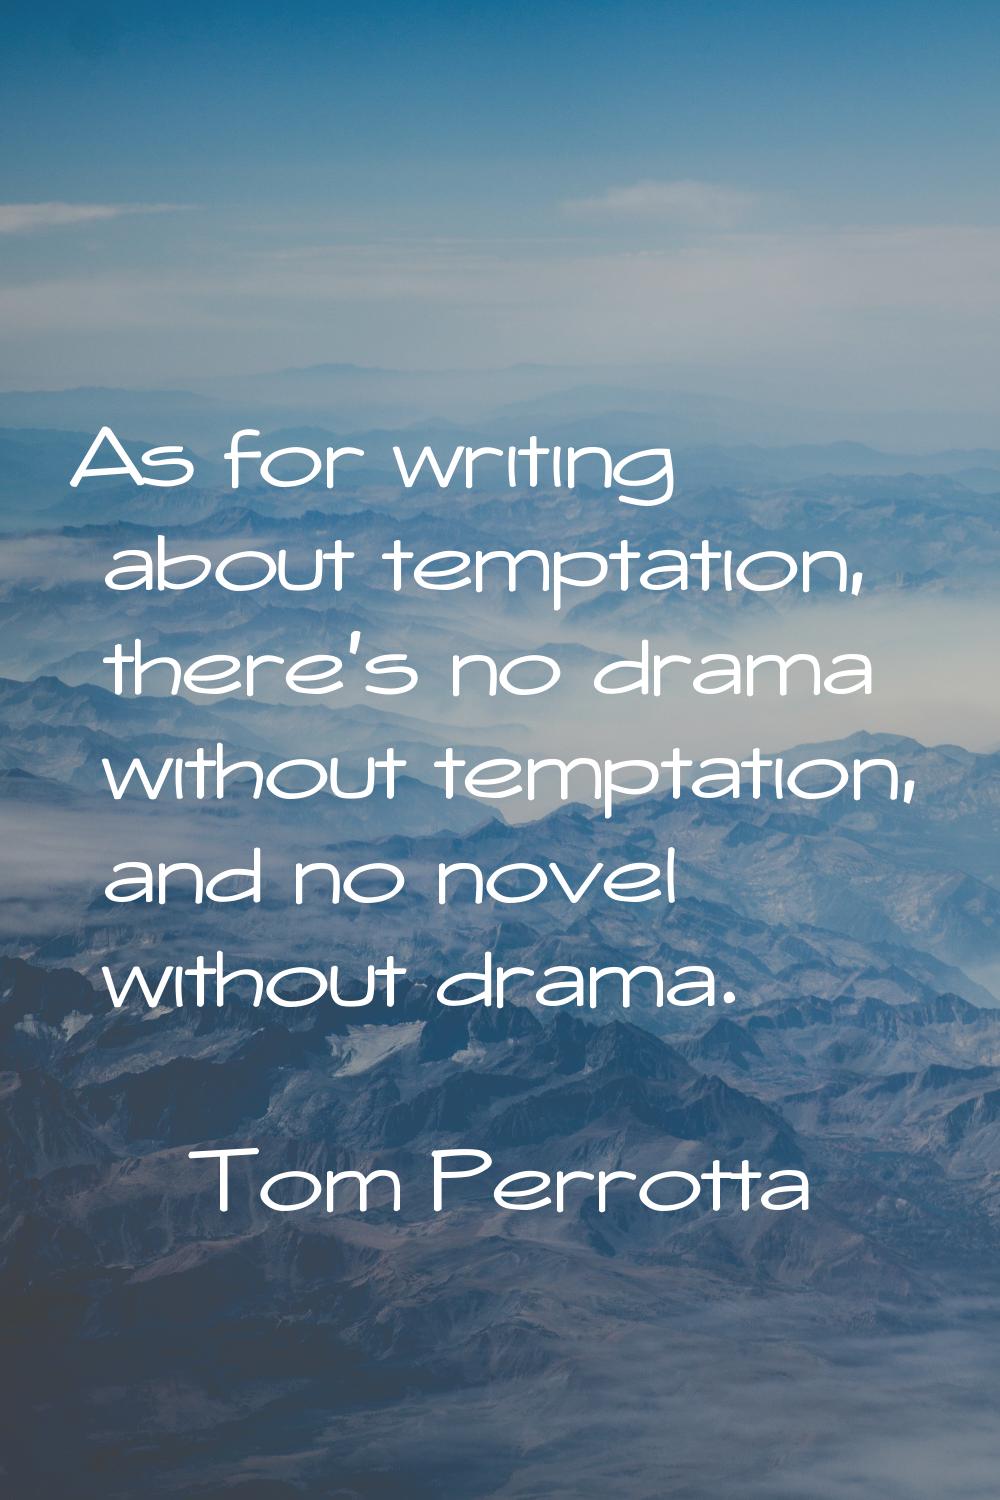 As for writing about temptation, there's no drama without temptation, and no novel without drama.